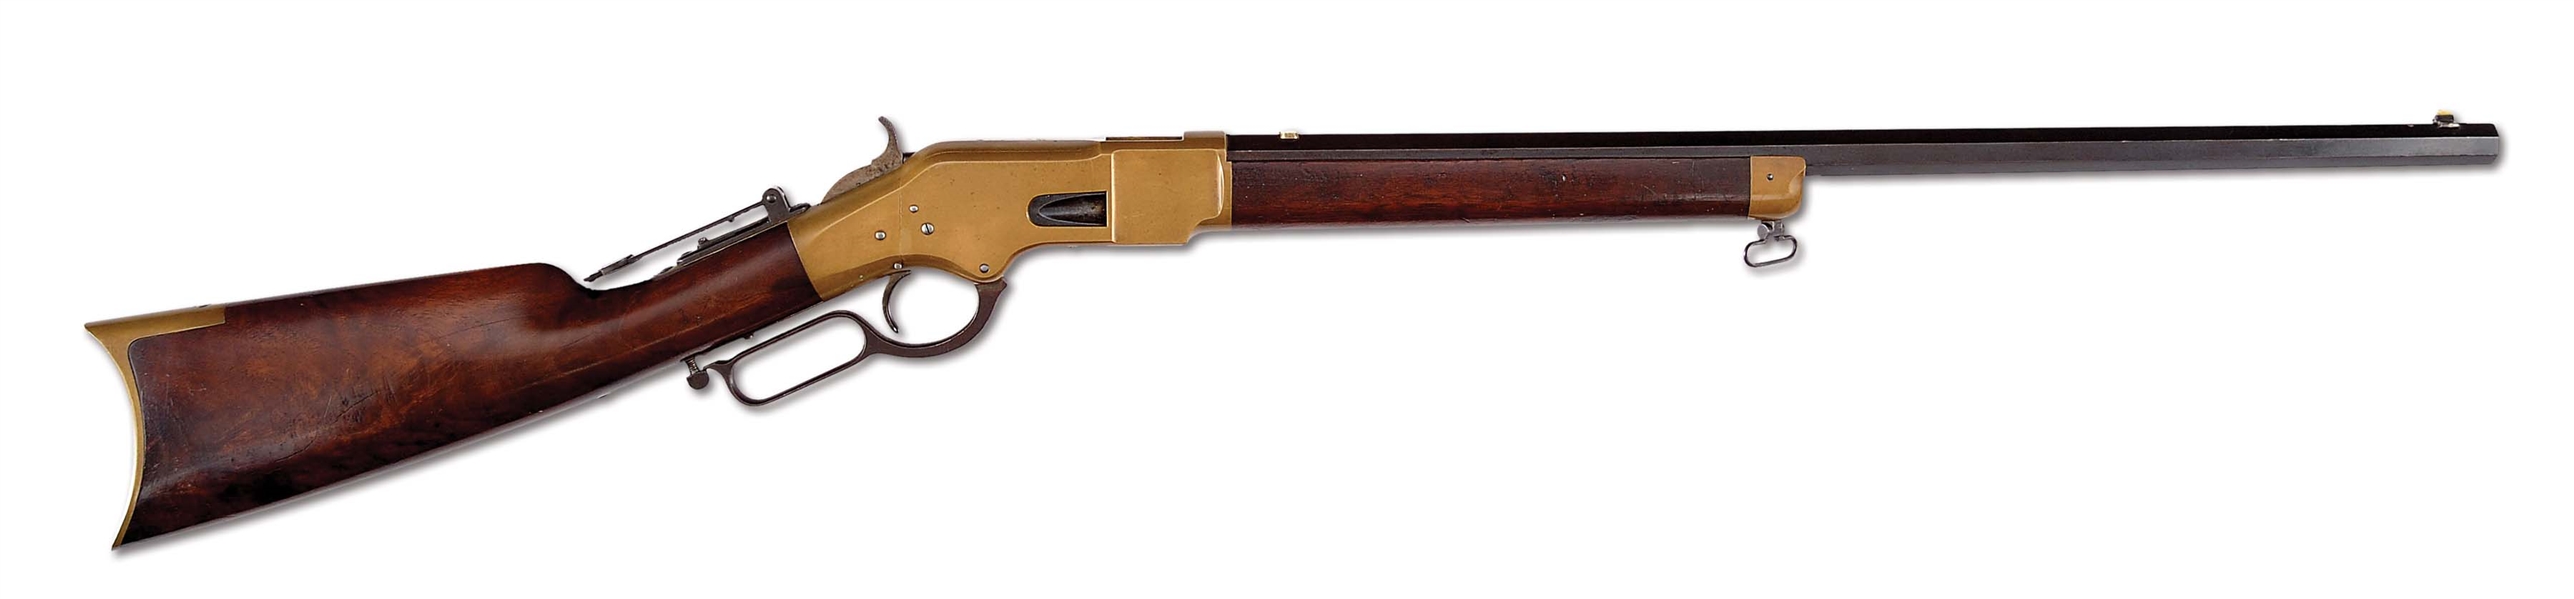 (A) OUTSTANDING WINCHESTER MODEL 1866 RIFLE EQUIPPED WITH CHEEK PIECE (1870/71).